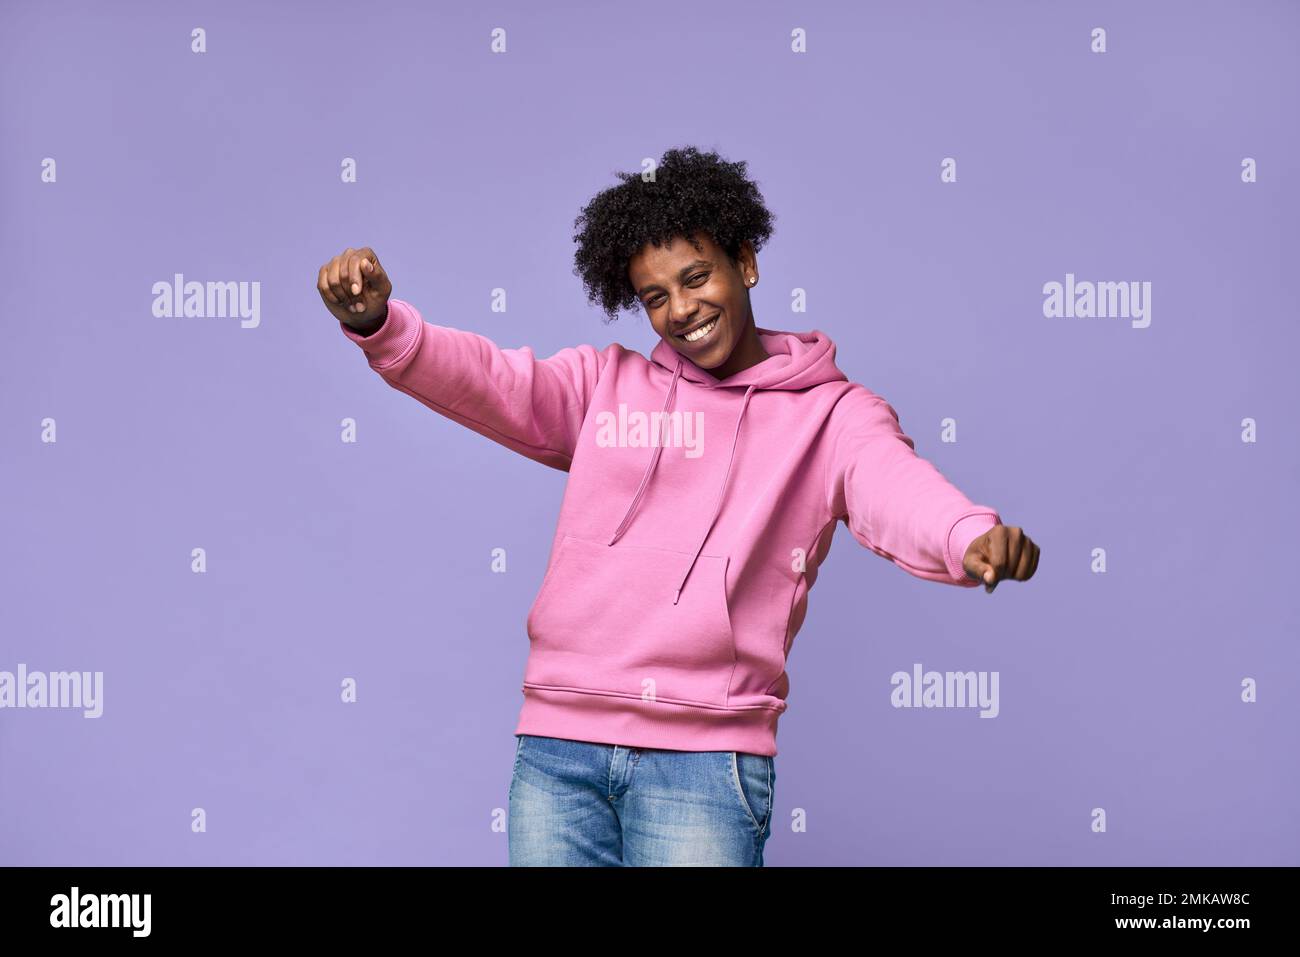 Funky African teen wearing pink hoodie dancing isolated on purple background. Stock Photo